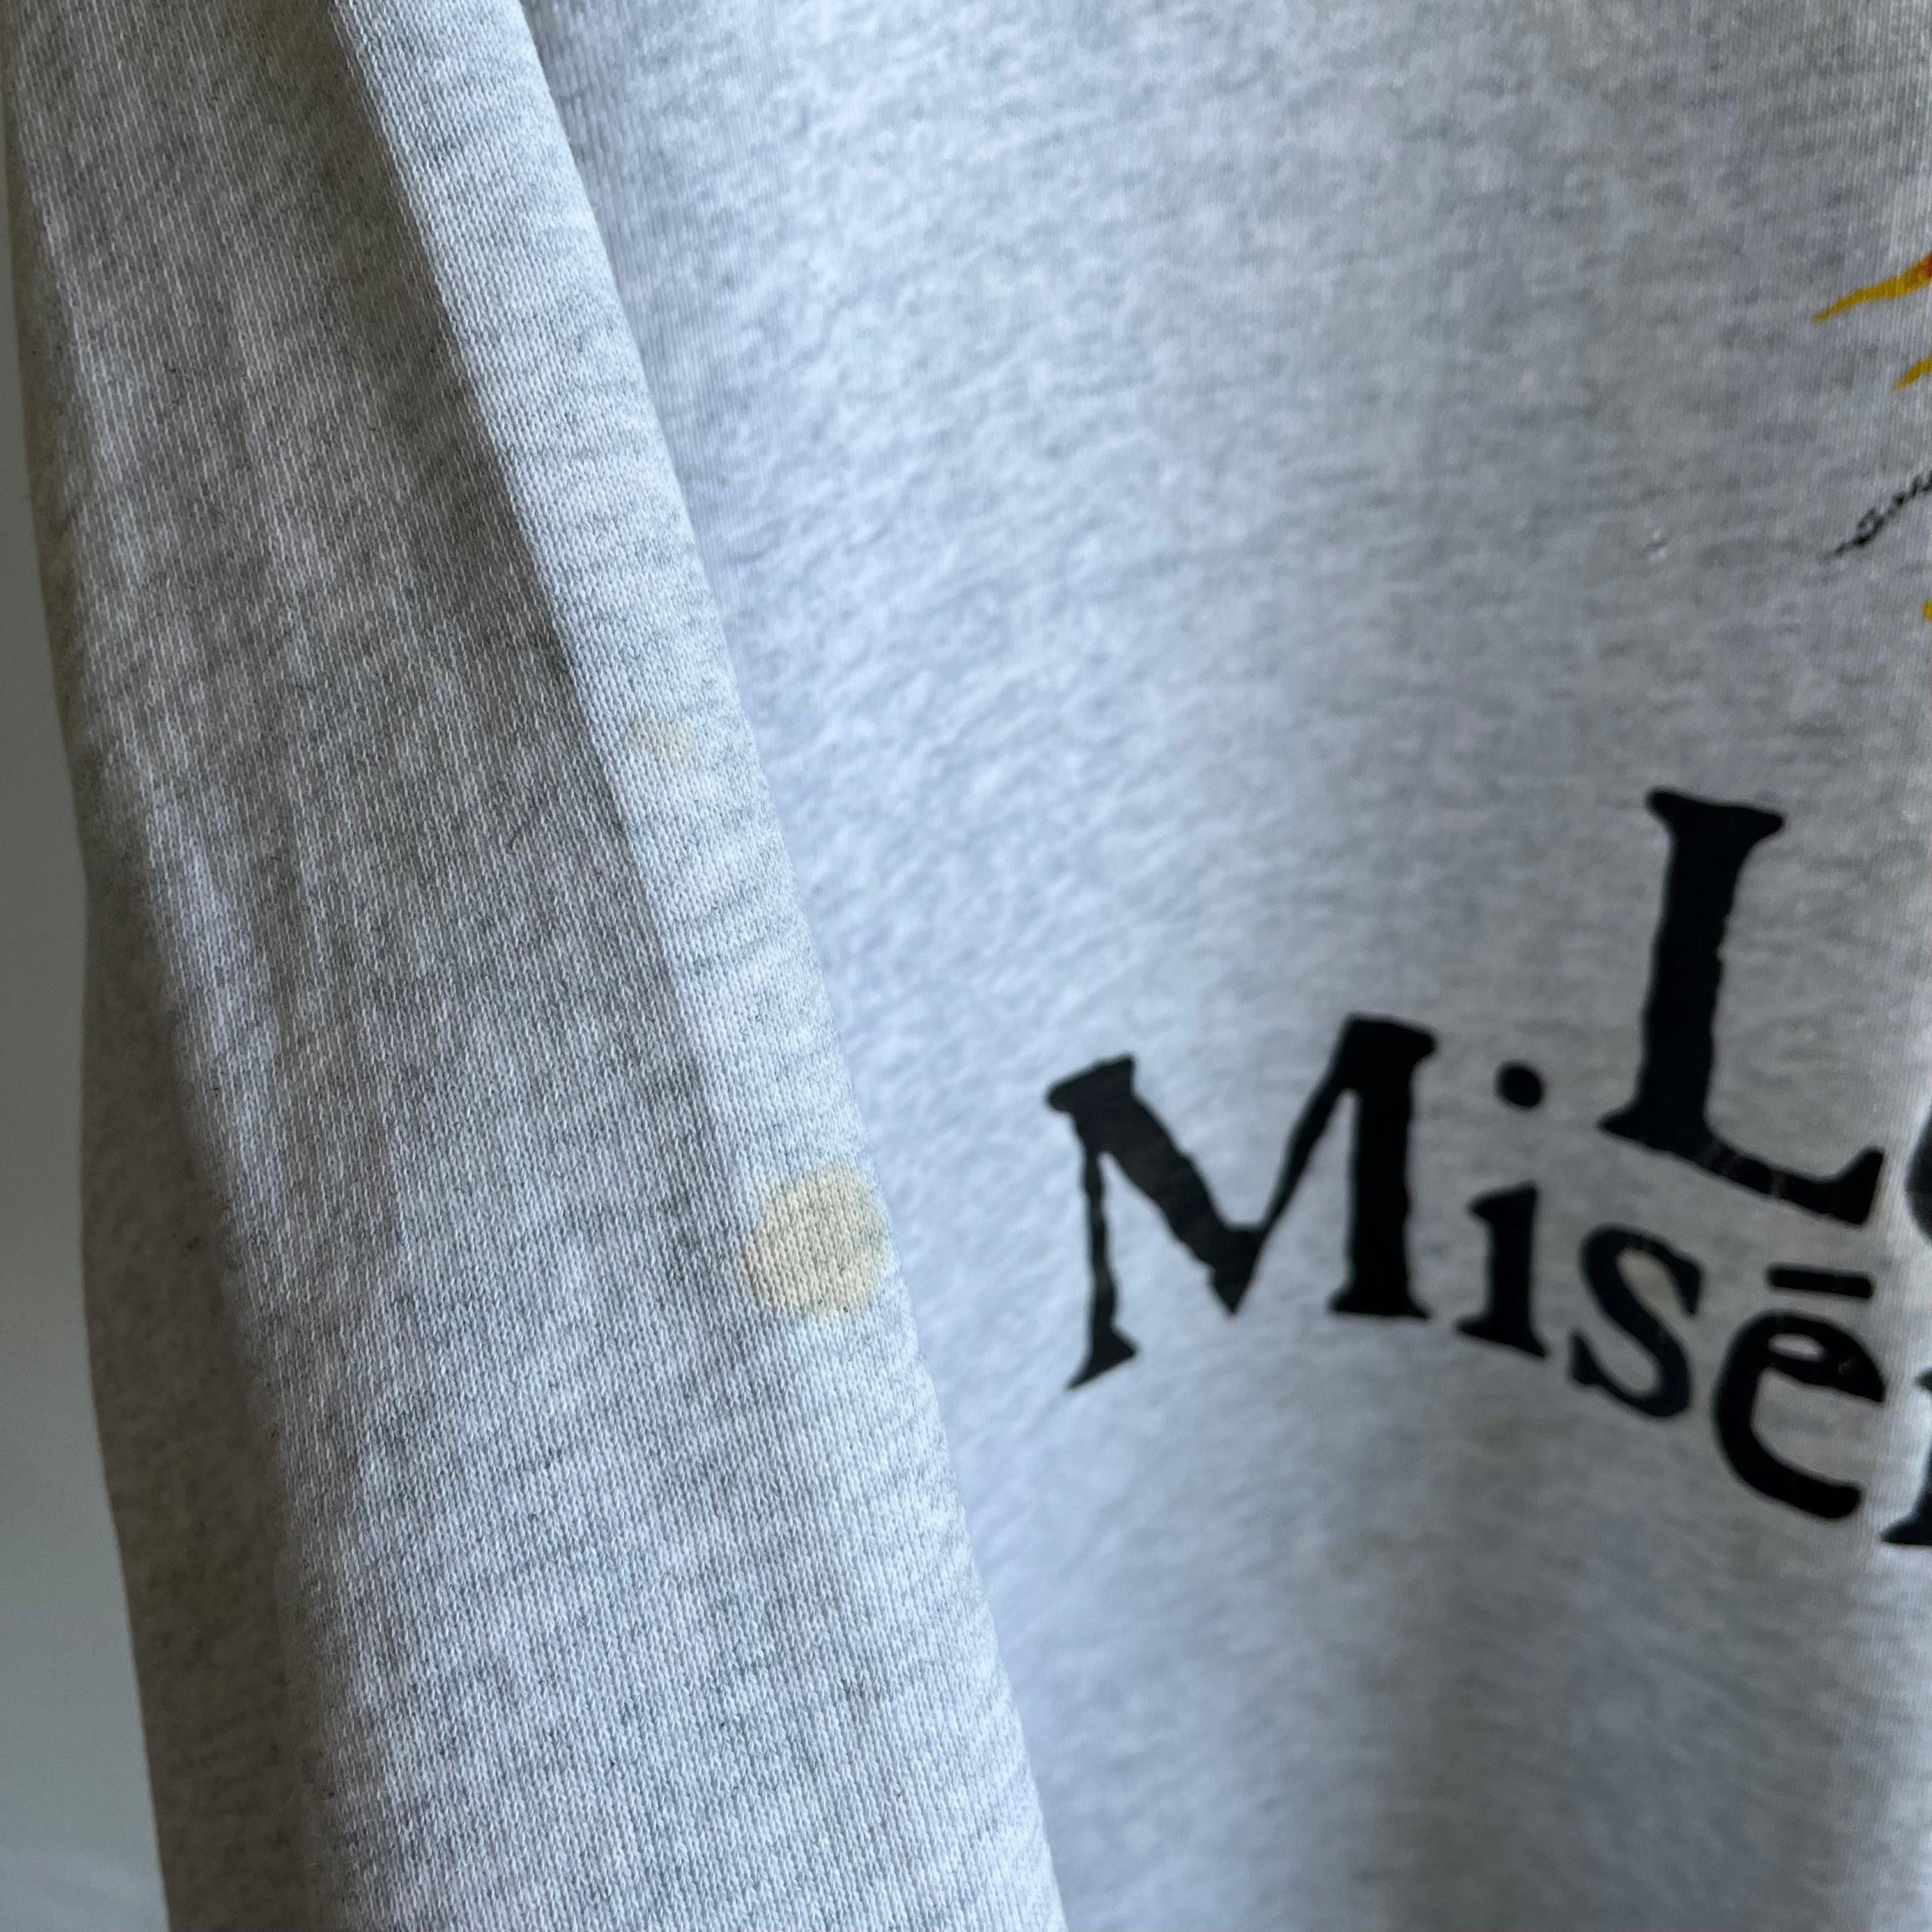 1986 Les Miserables Stained Sweatshirt